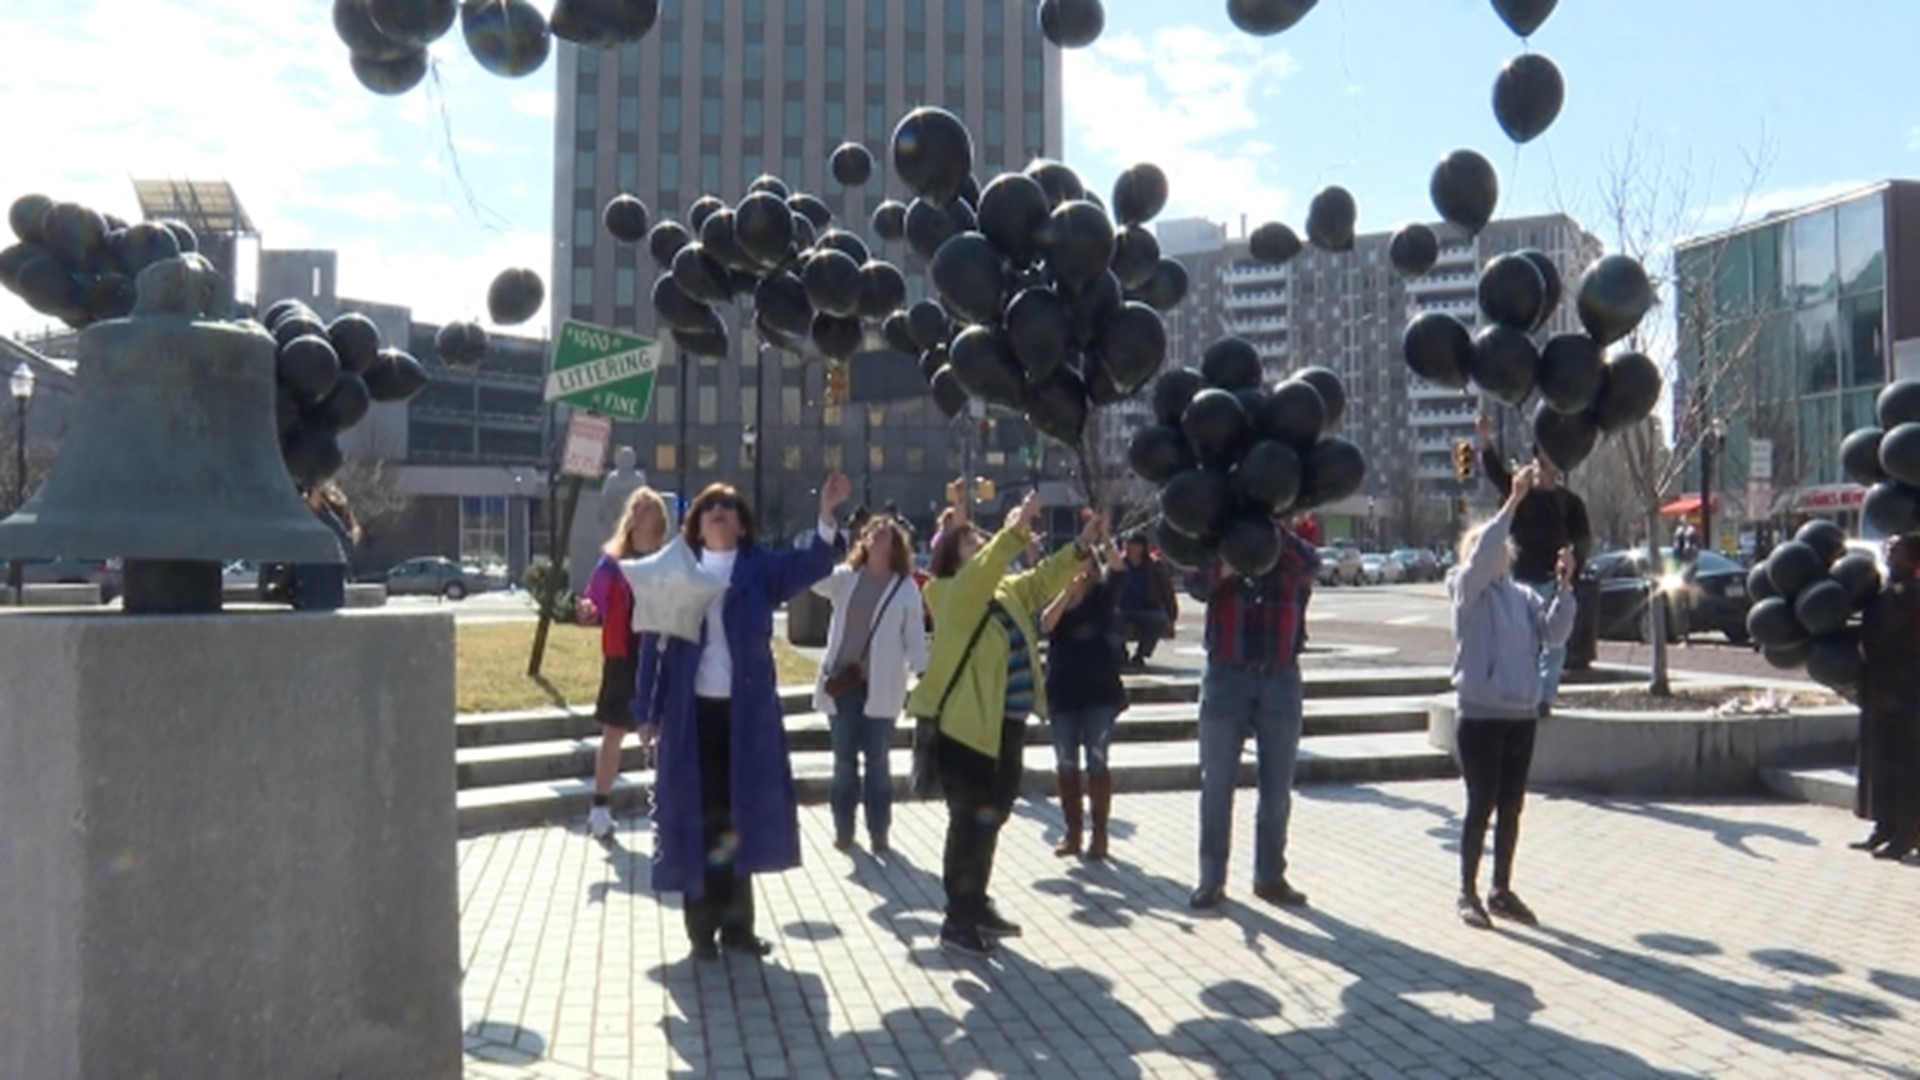 A small group released a large number of black balloons in Public Square on Sunday, each balloon representing a life lost to an overdose in the area this past year.